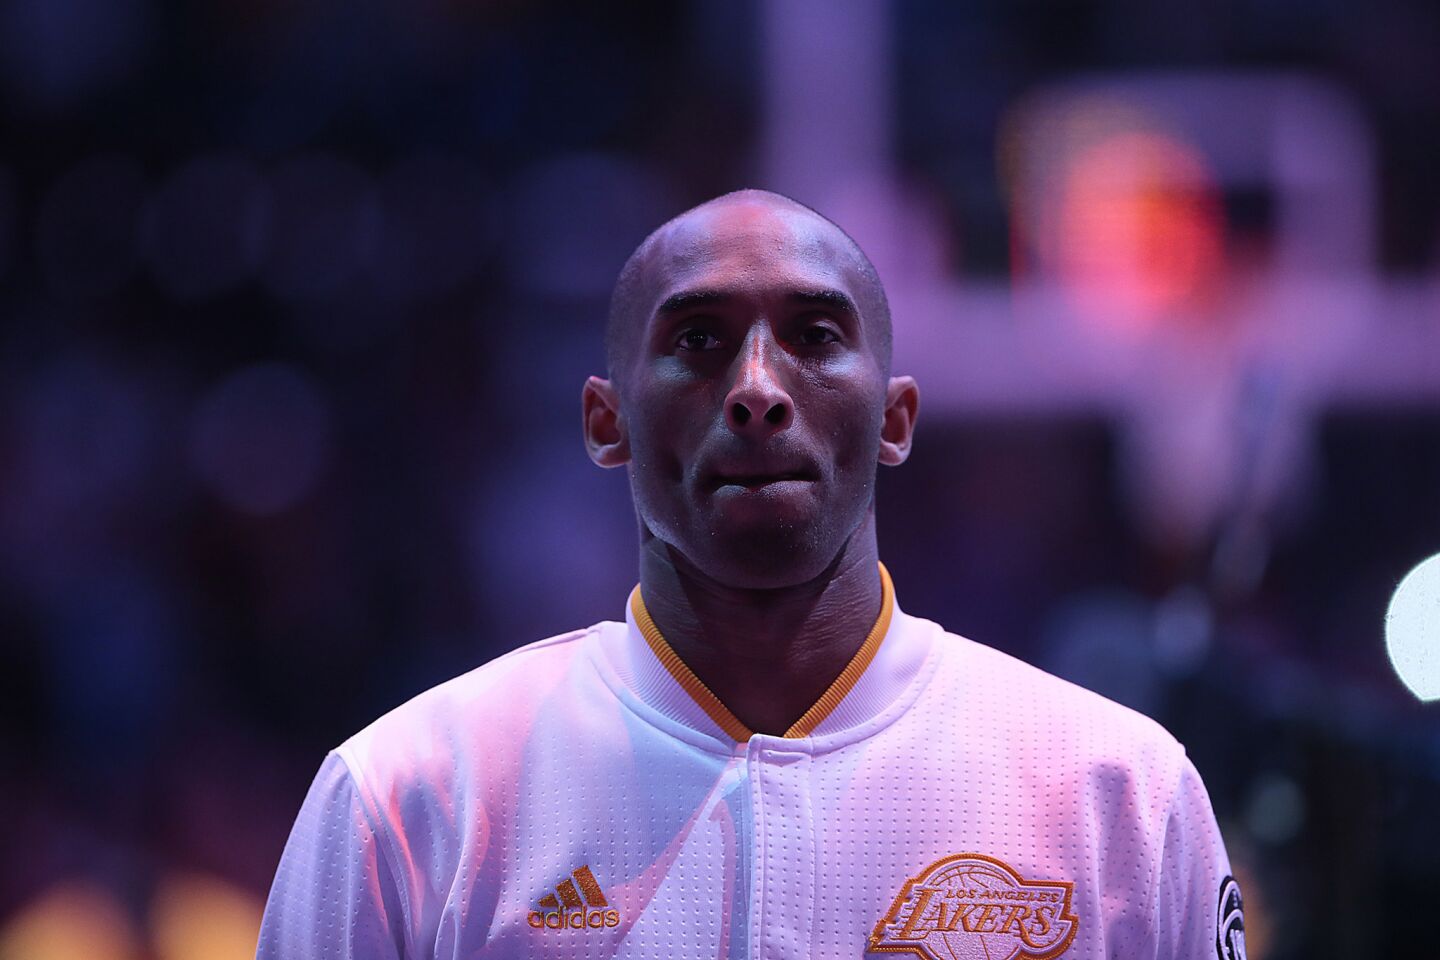 Top 10 moments from Kobe Bryant's career